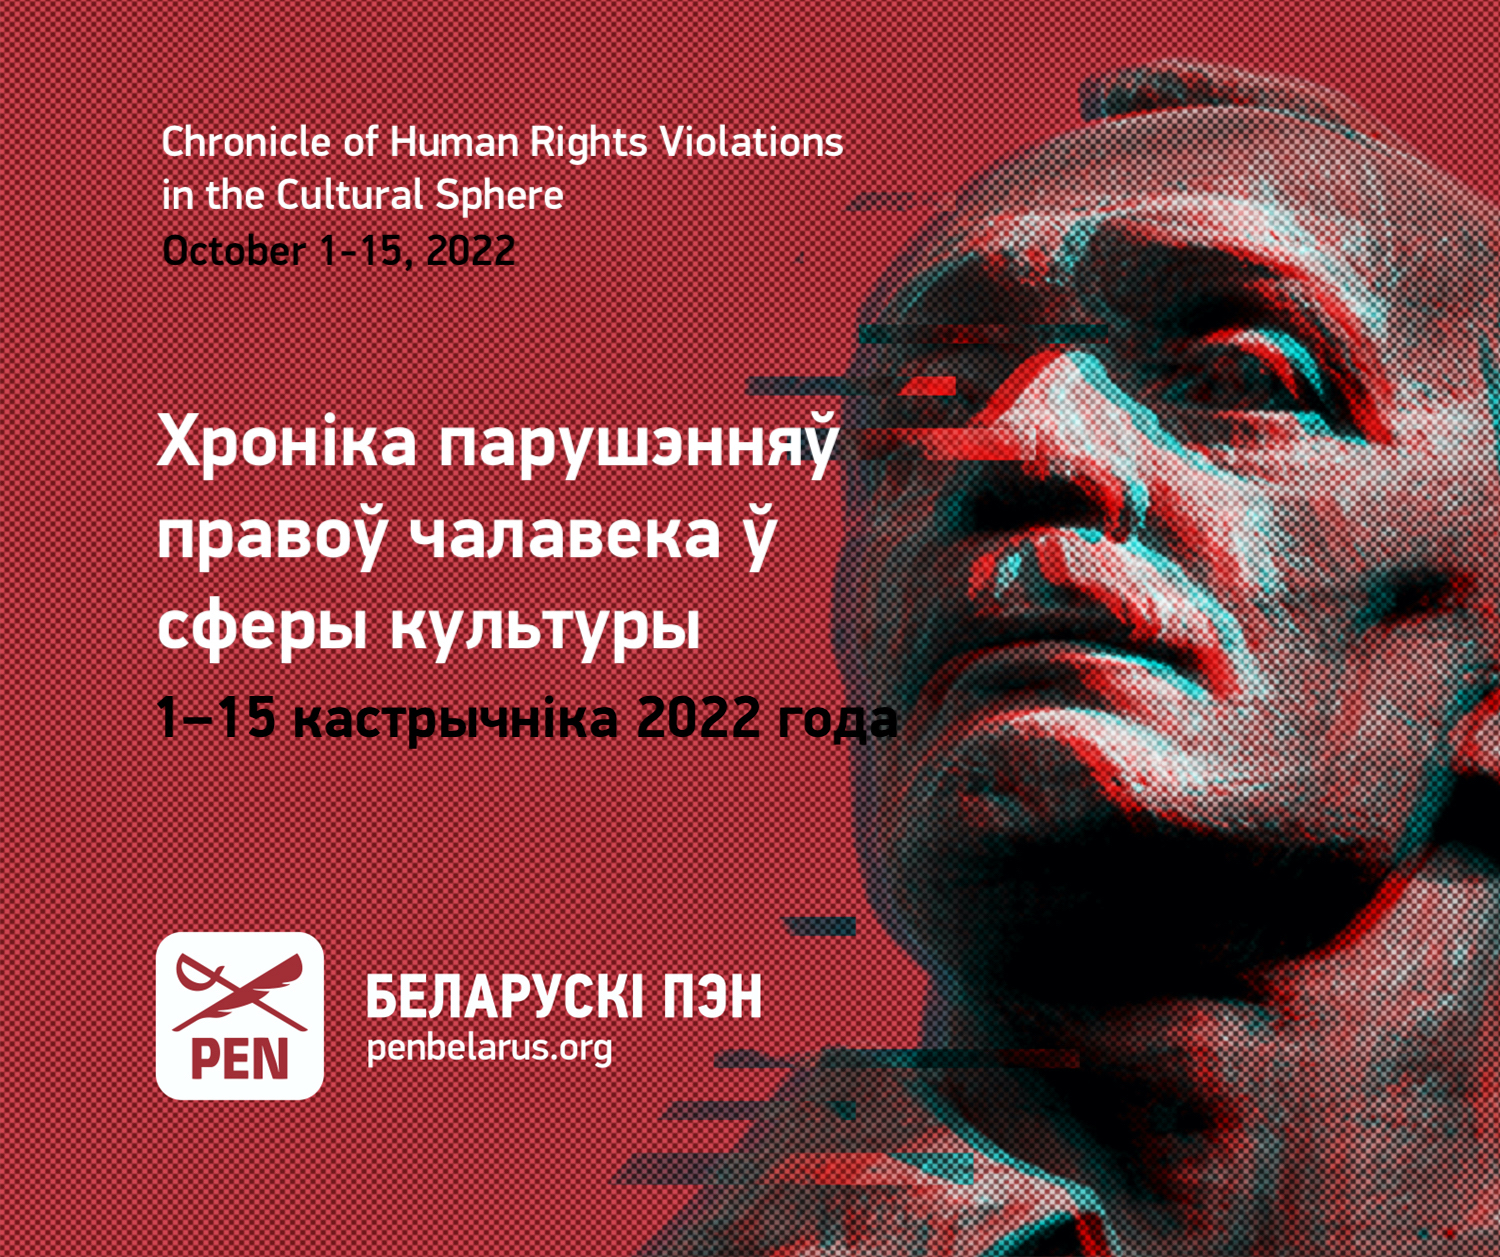 Chronicle of Human Rights Violations in the Cultural Sphere (October 1-15, 2022)